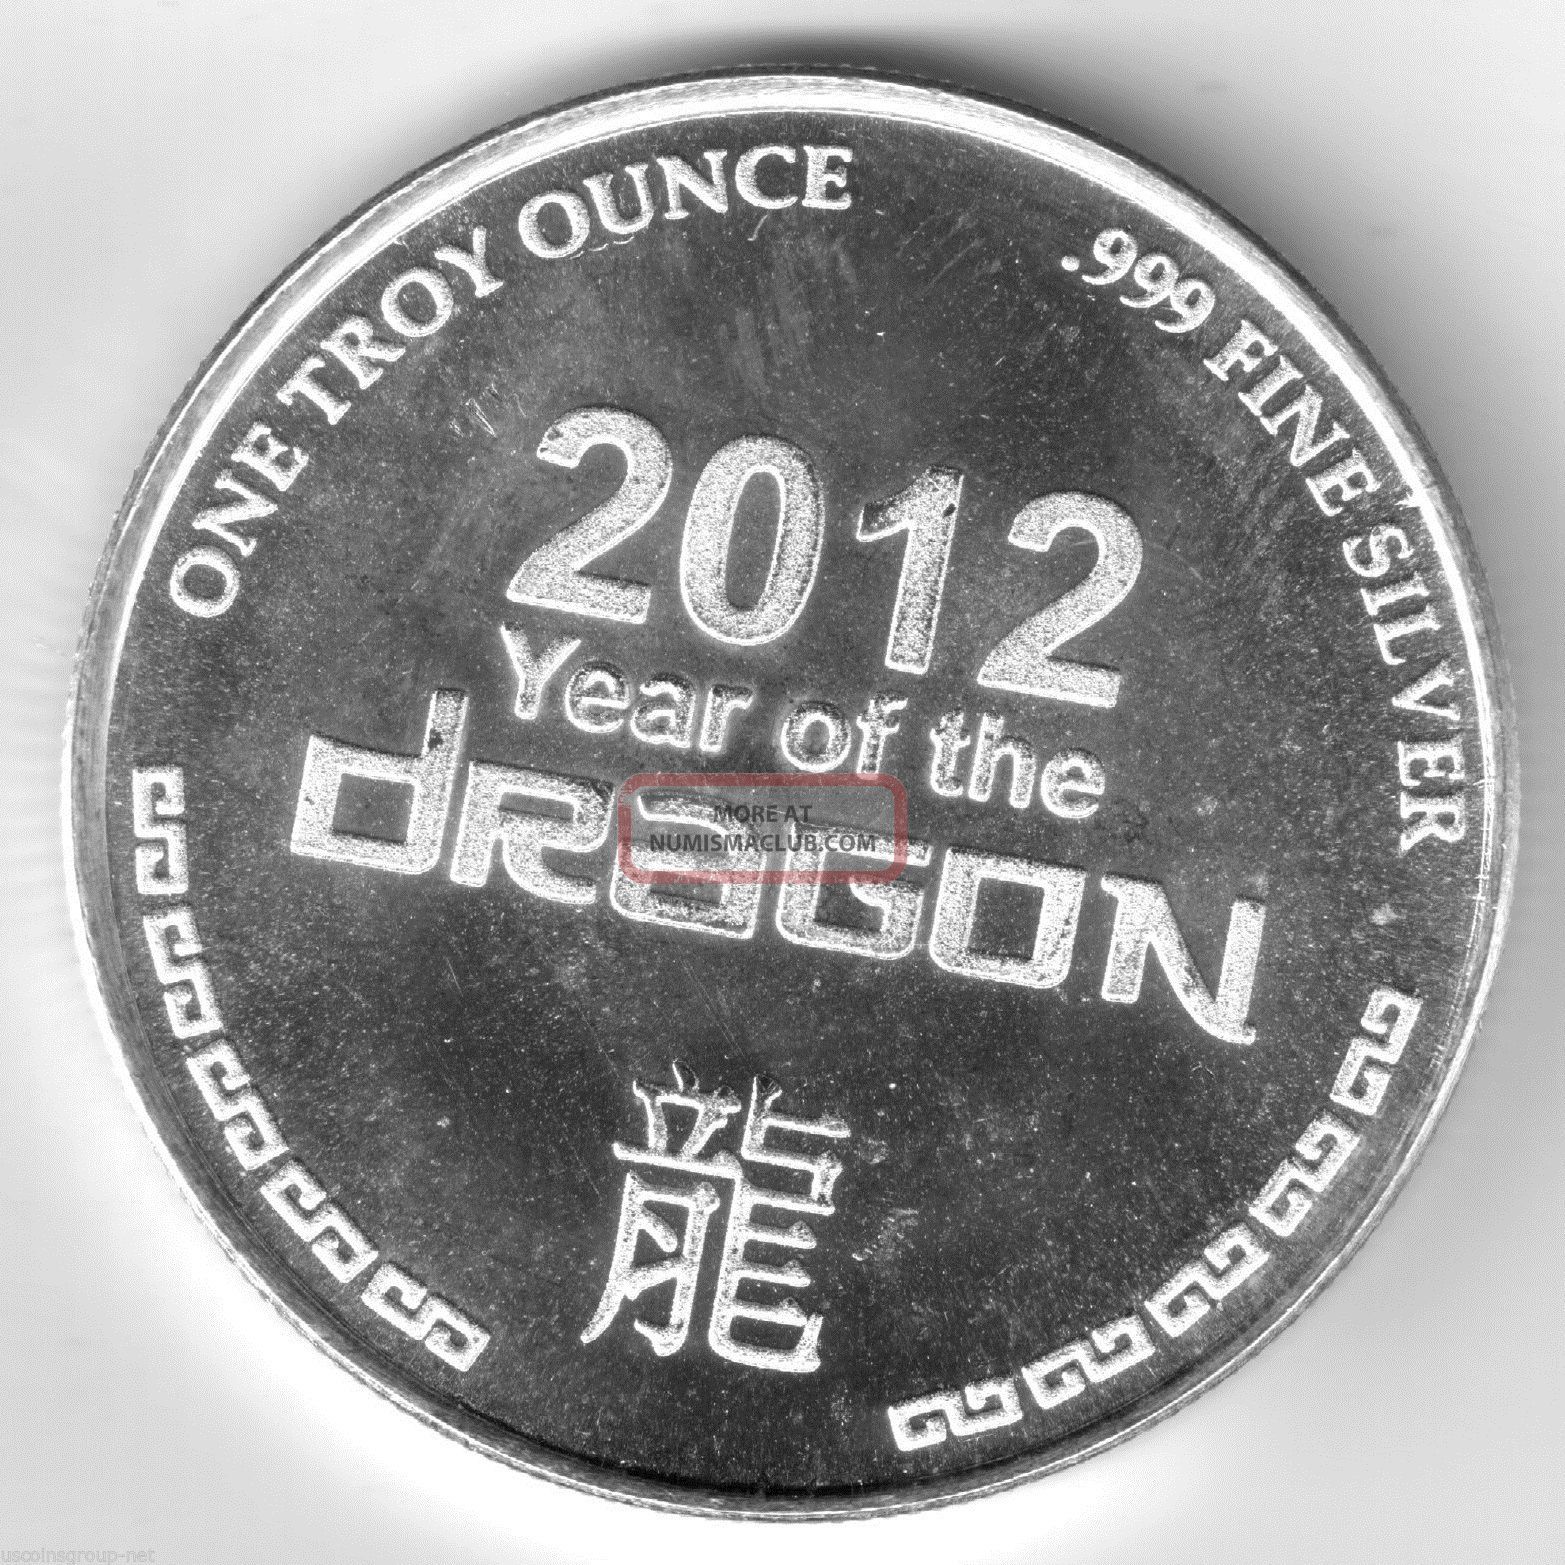 2012 1 Oz Silver Year Of The Dragon Round - Proof Like (. 999 Pure Silver)